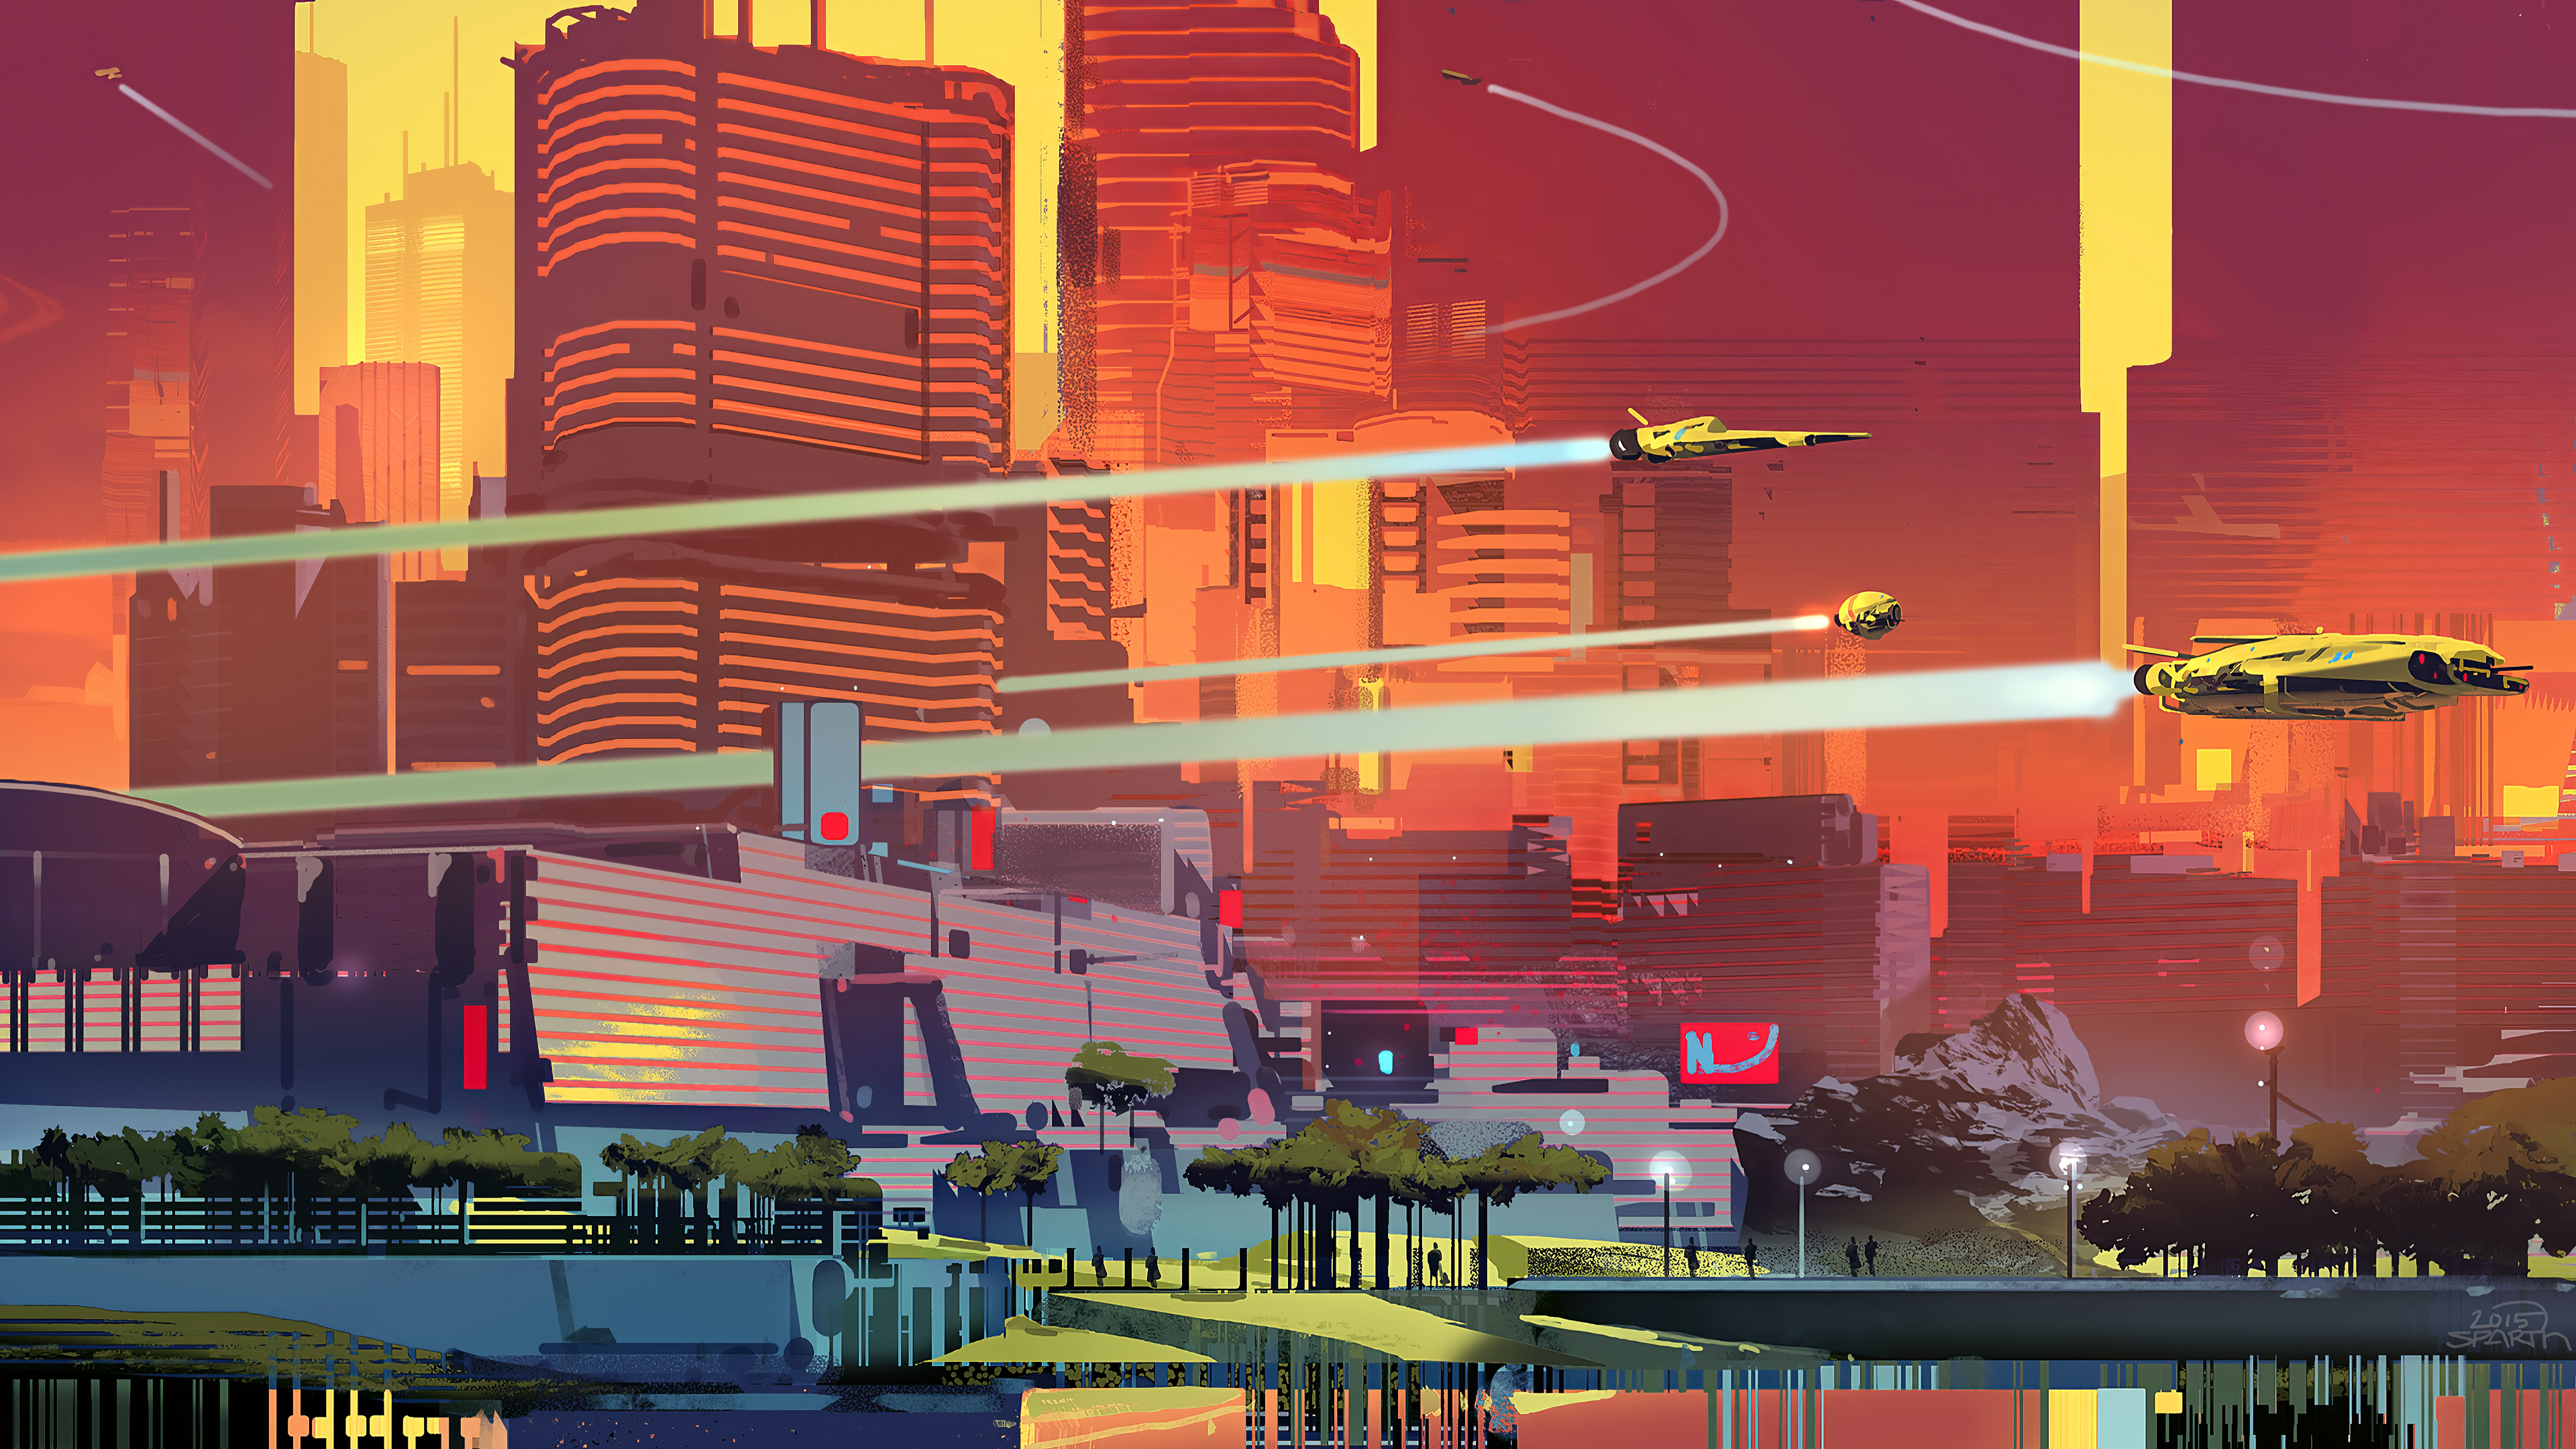 Monolith Park by Sparth [3840x2160]